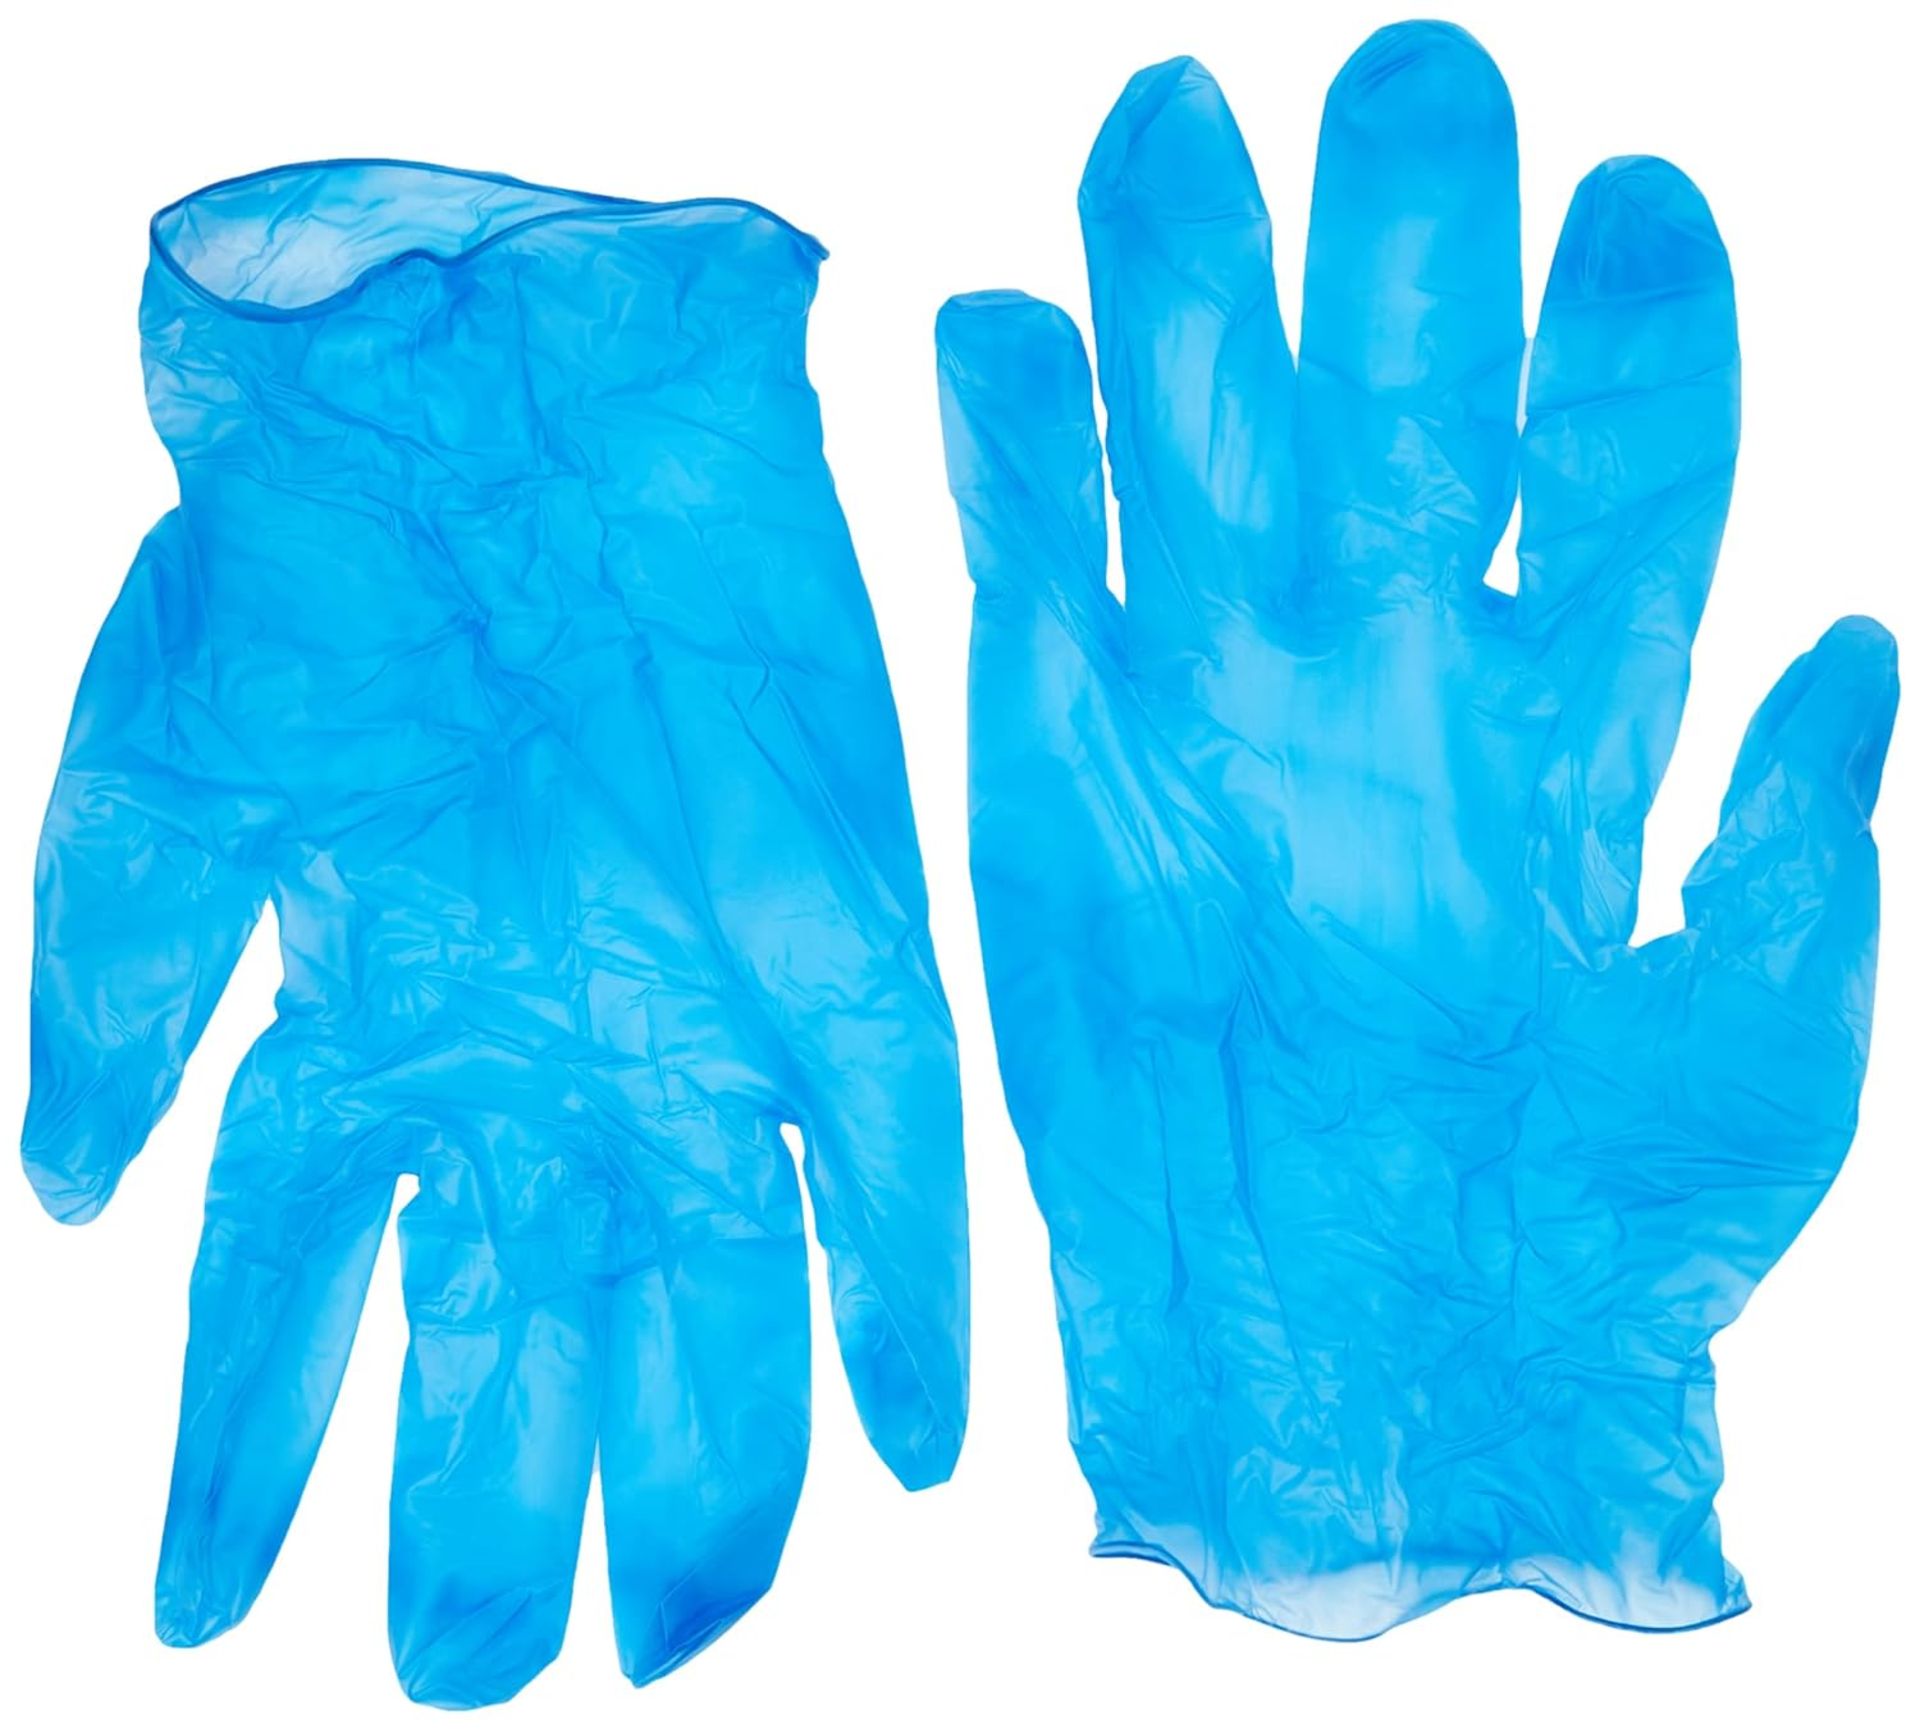 100 X BRAND NEW PACKS OF 100 SAFETOUCH BLUE VINYL GLOVES POWDER FREE SIZE XL BLUE EXP OCT 2026 - Image 2 of 2